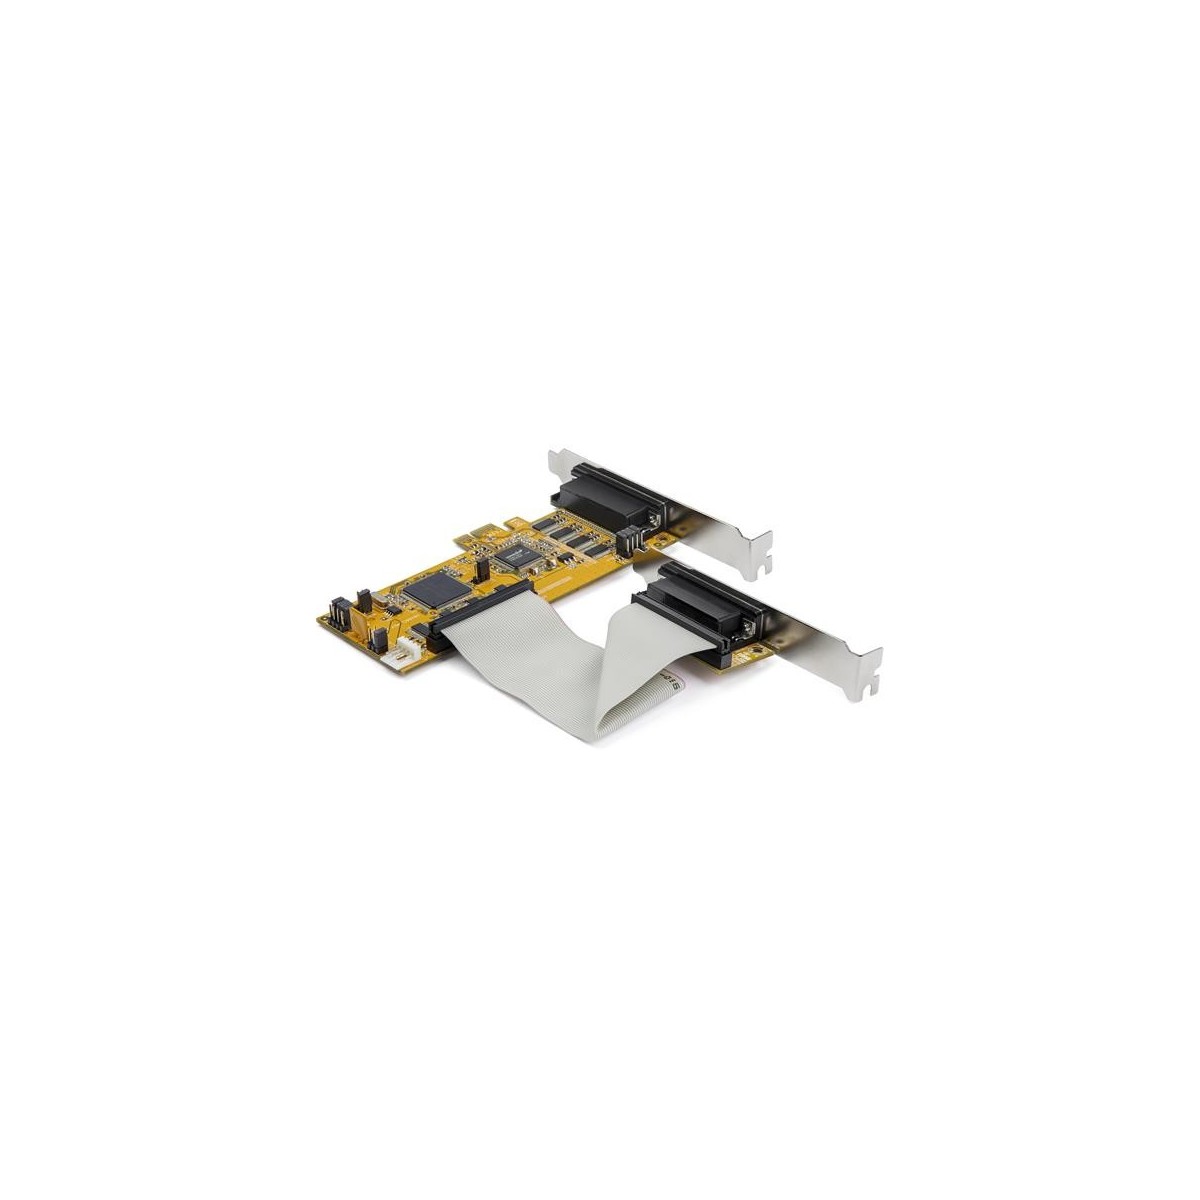 StarTech.com 8-Port PCI Express RS232 Serial Adapter Card - PCIe RS232 Serial Card - 16C1050 UART - Low Profile Serial DB9 Contr